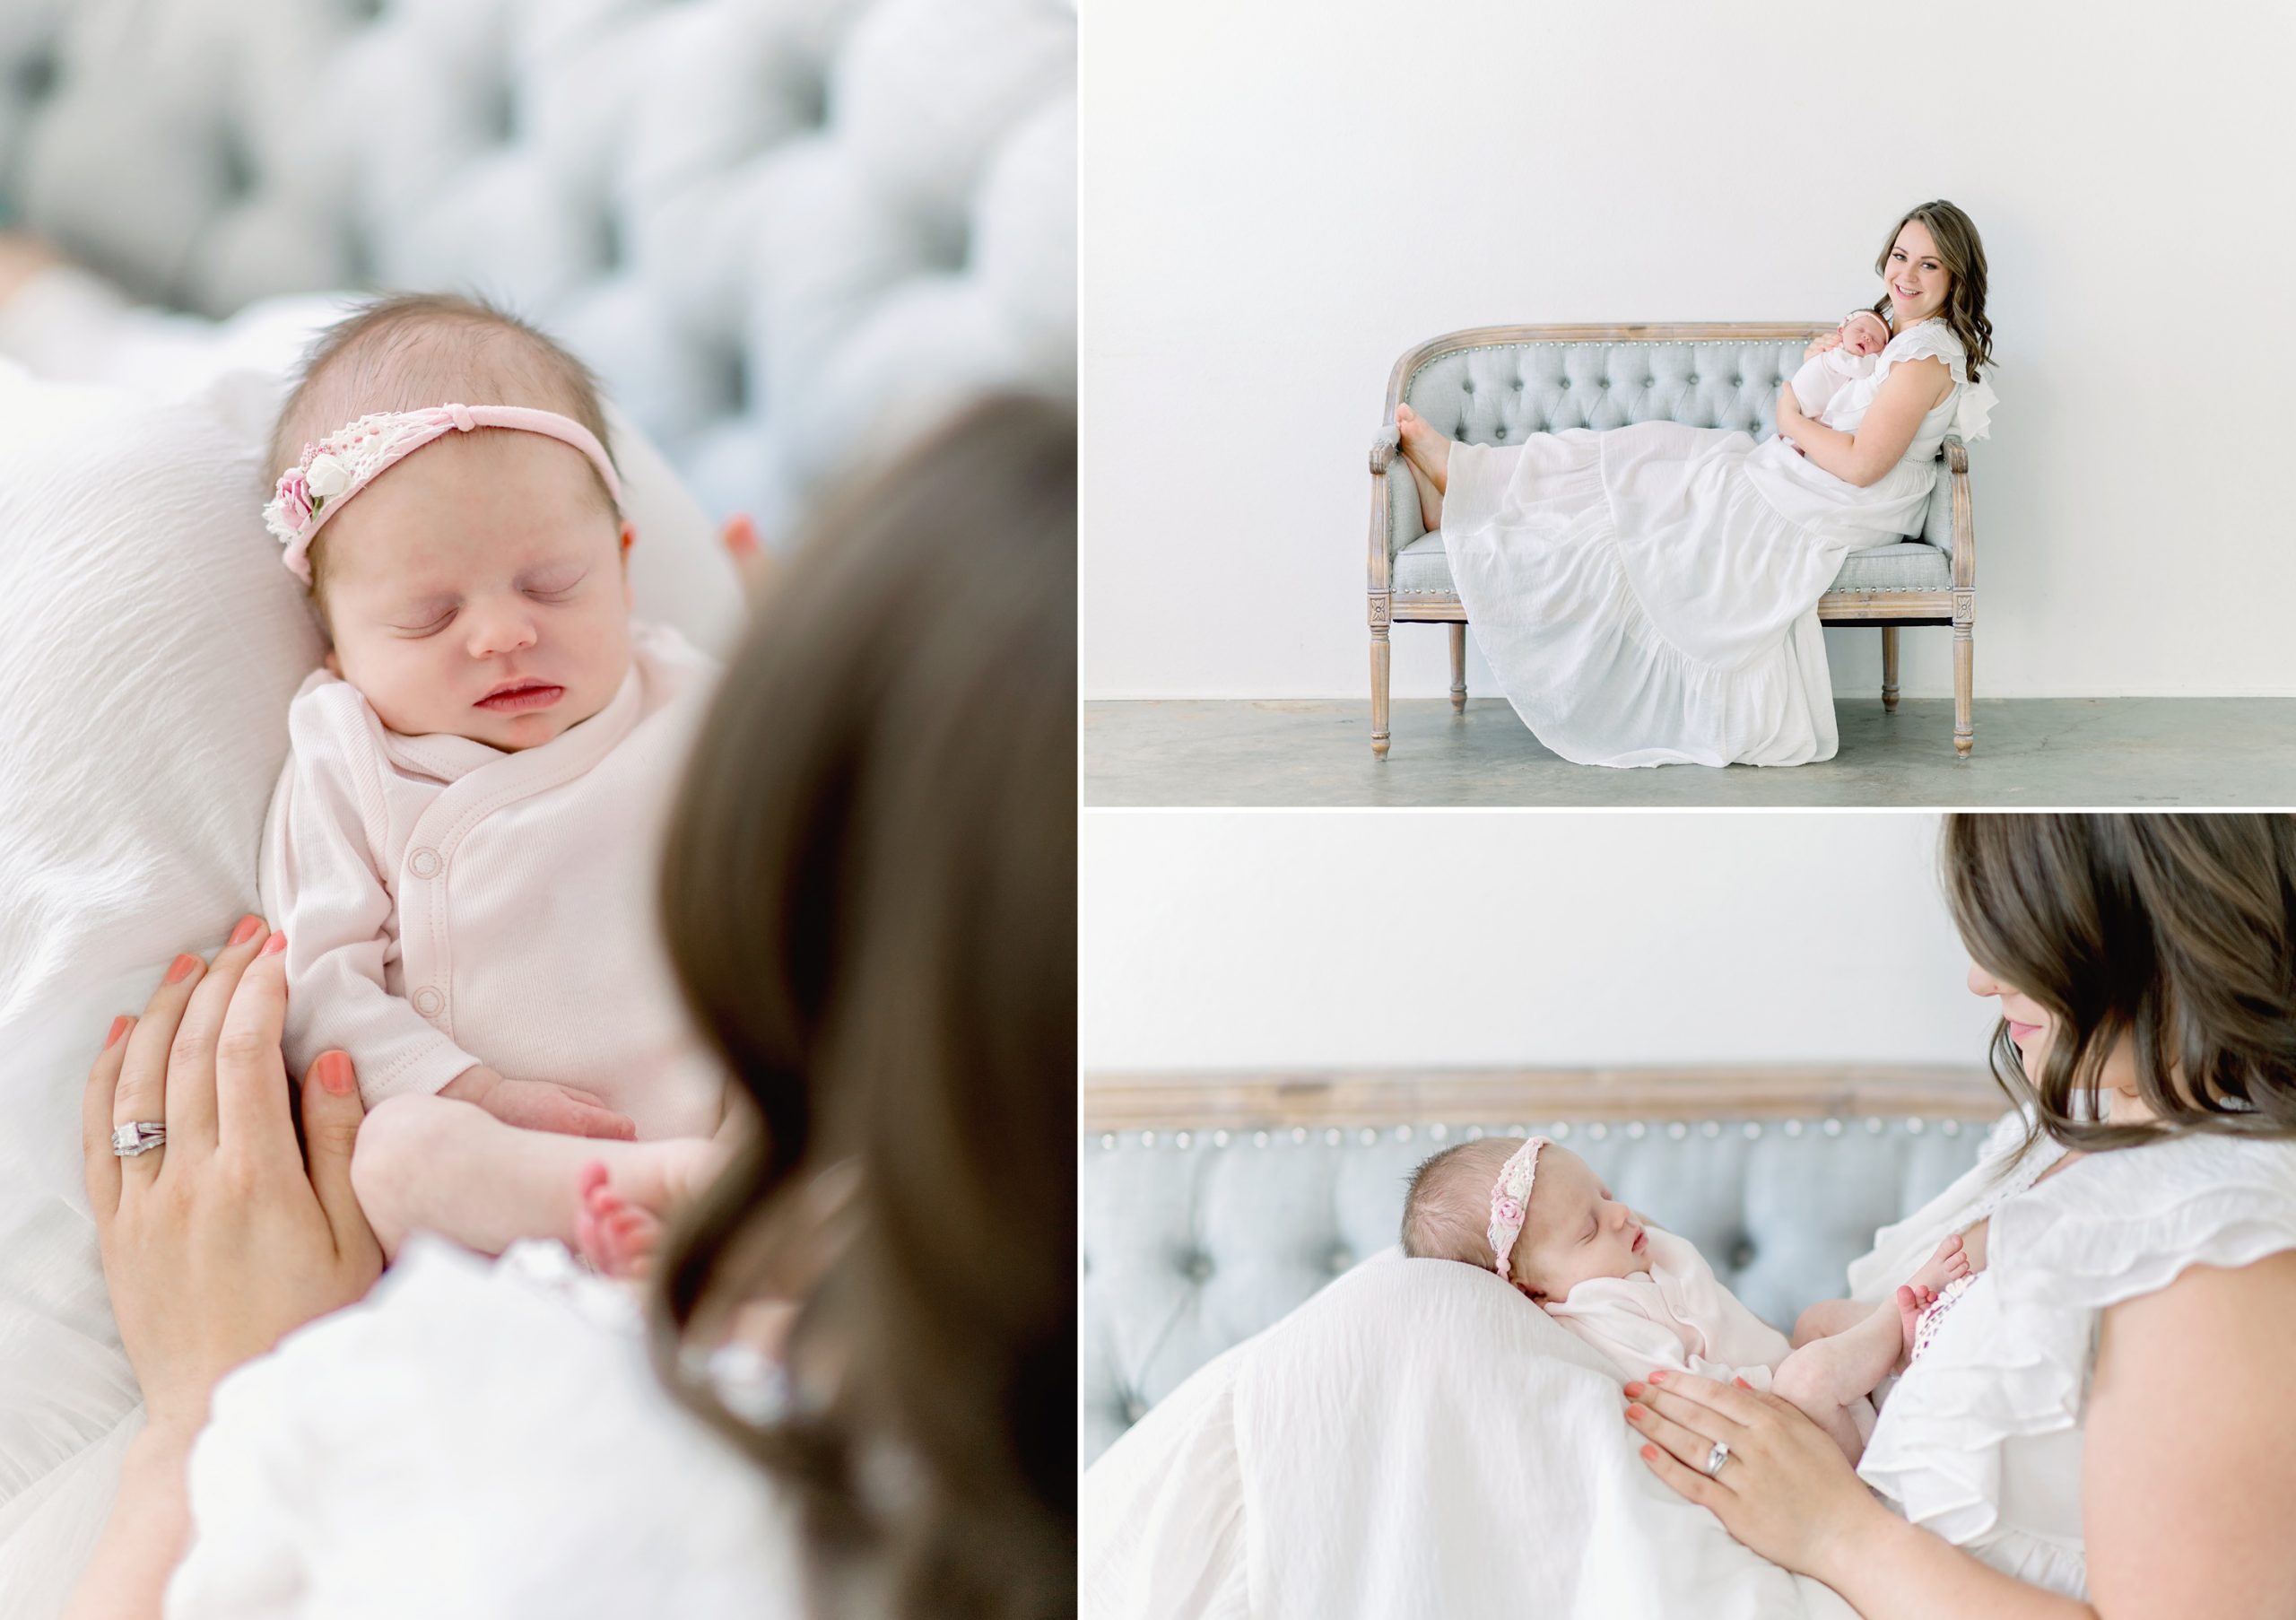 A young couple get fine art newborn portraits done with their new baby girl in a bright white studio in Denver, Colorado.